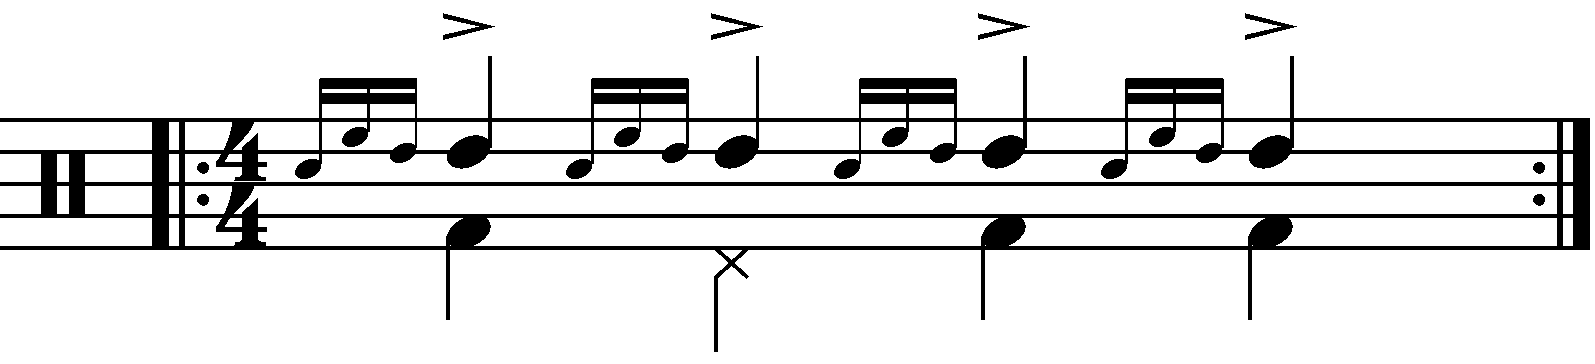 A Four Stroke Ruff moving in a triangle shape